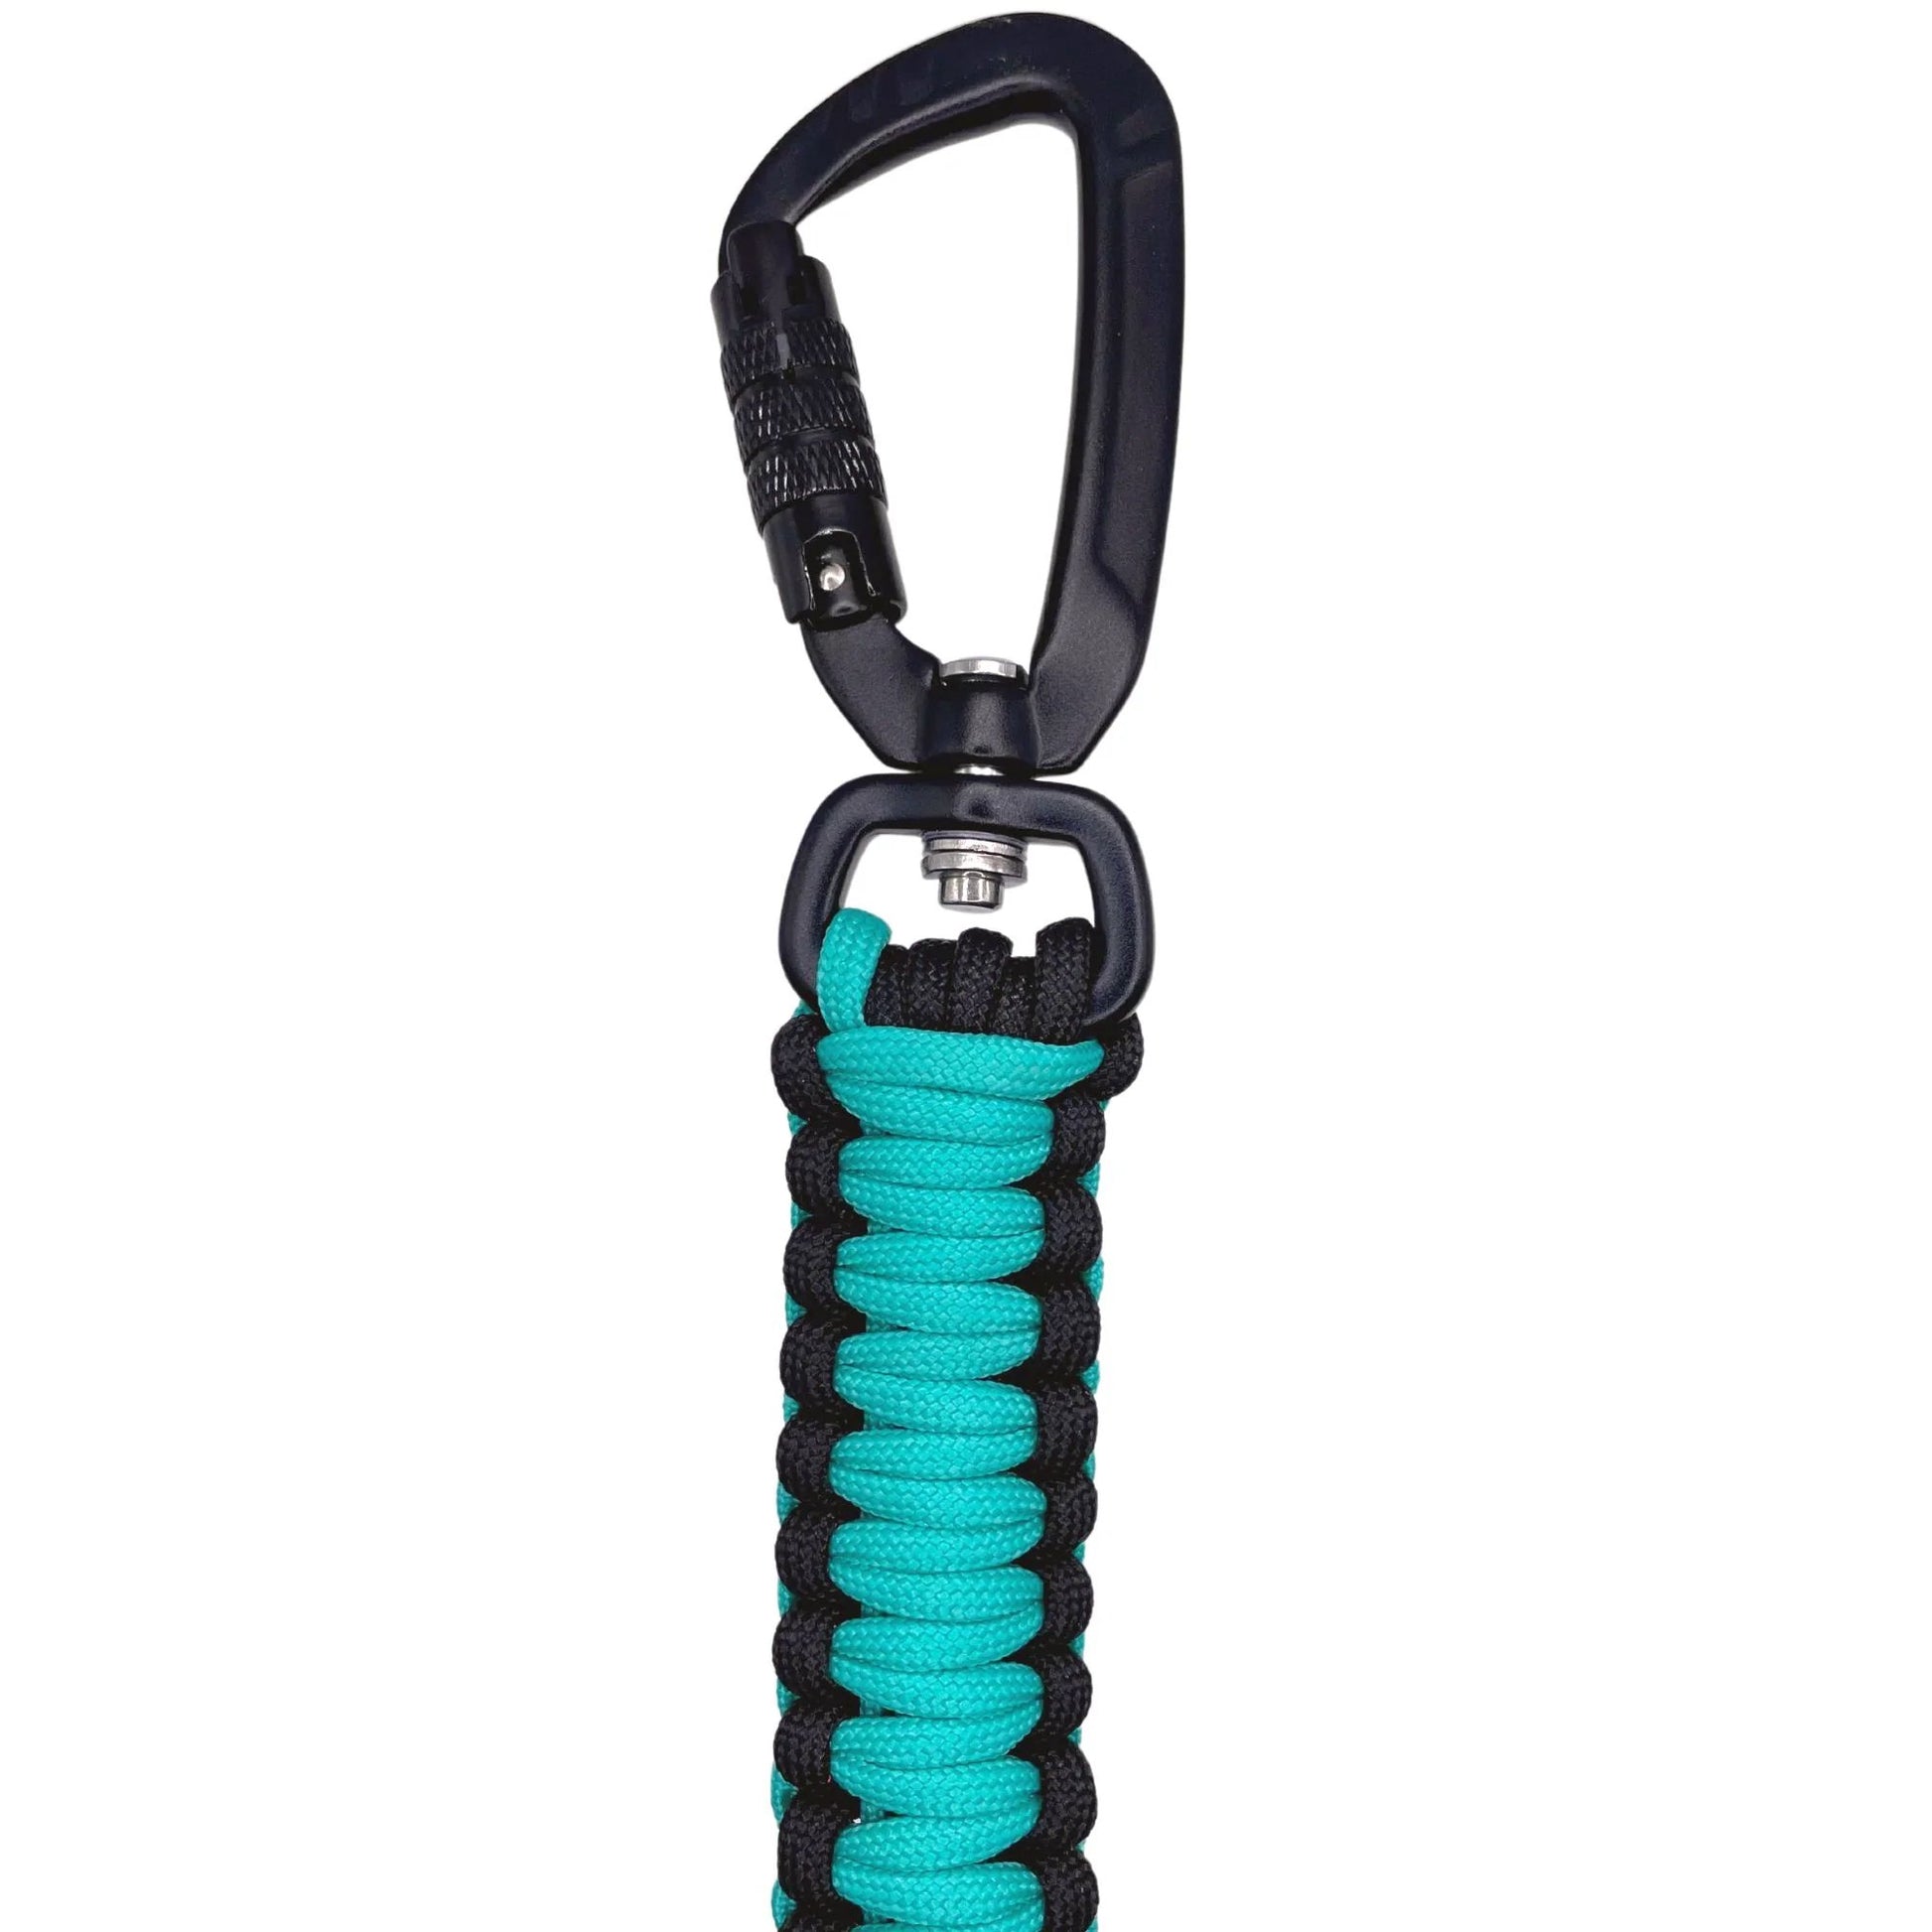 Top selling bright teal Paracord dog leash with auto-locking carabiner and non-slip grip